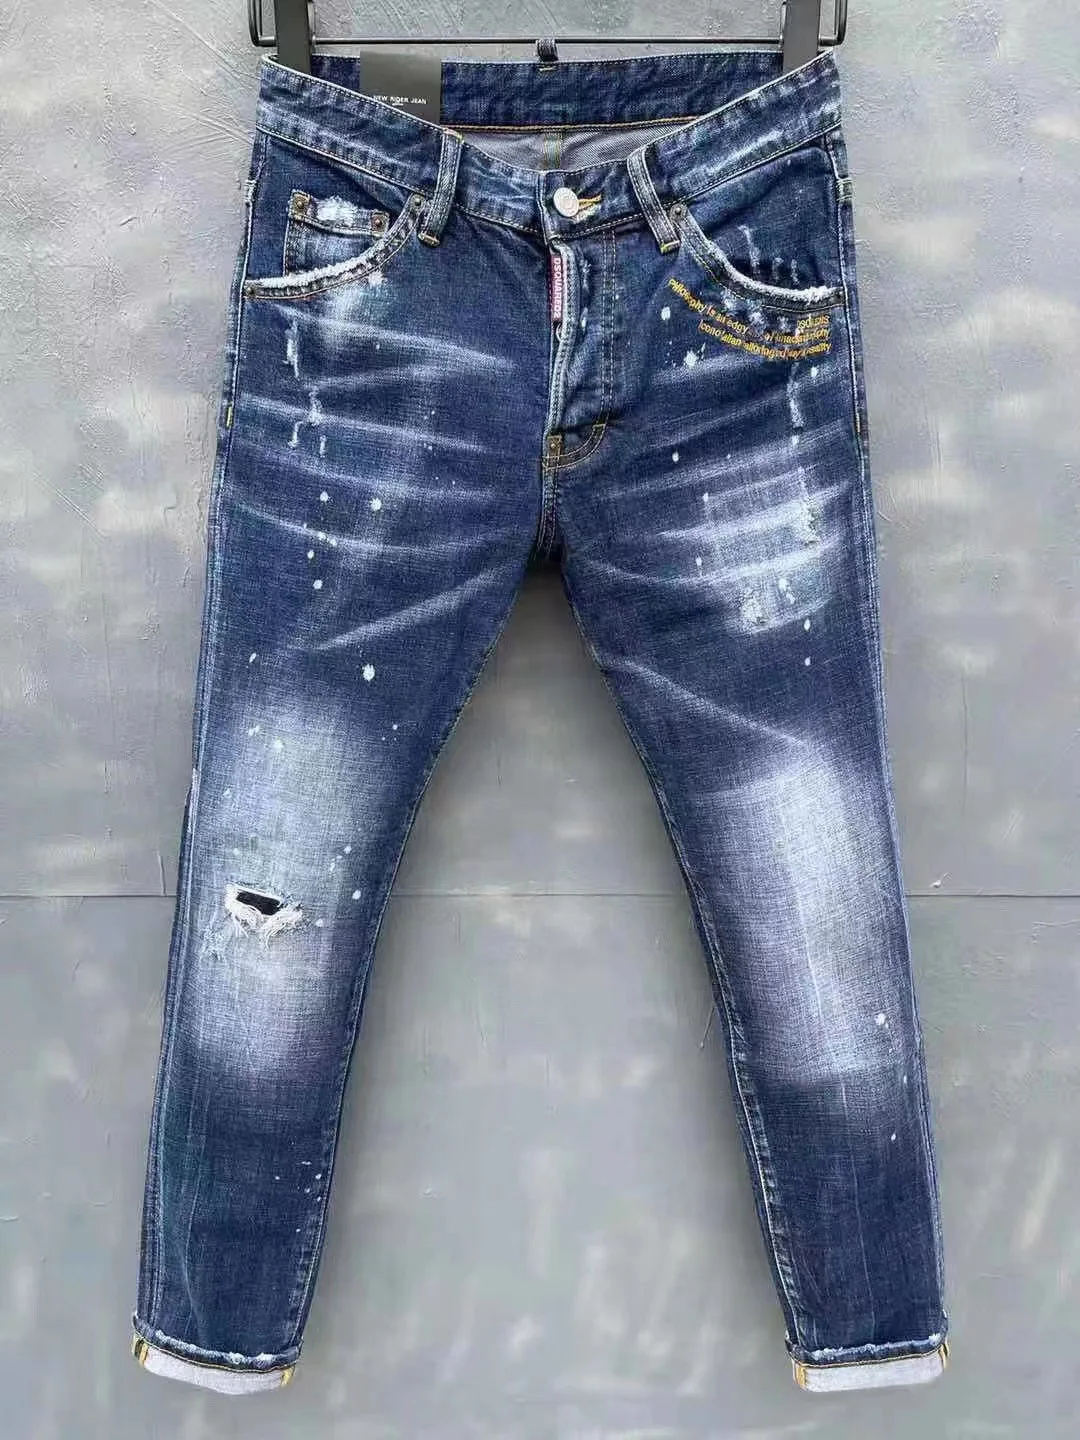 

New Arrival 2022 Men's Cotton Ripped Hole Jeans Casual Slim Skinny Jeans Men Trousers Dsquared2 Stretch Hip Hop Denim Pants Male